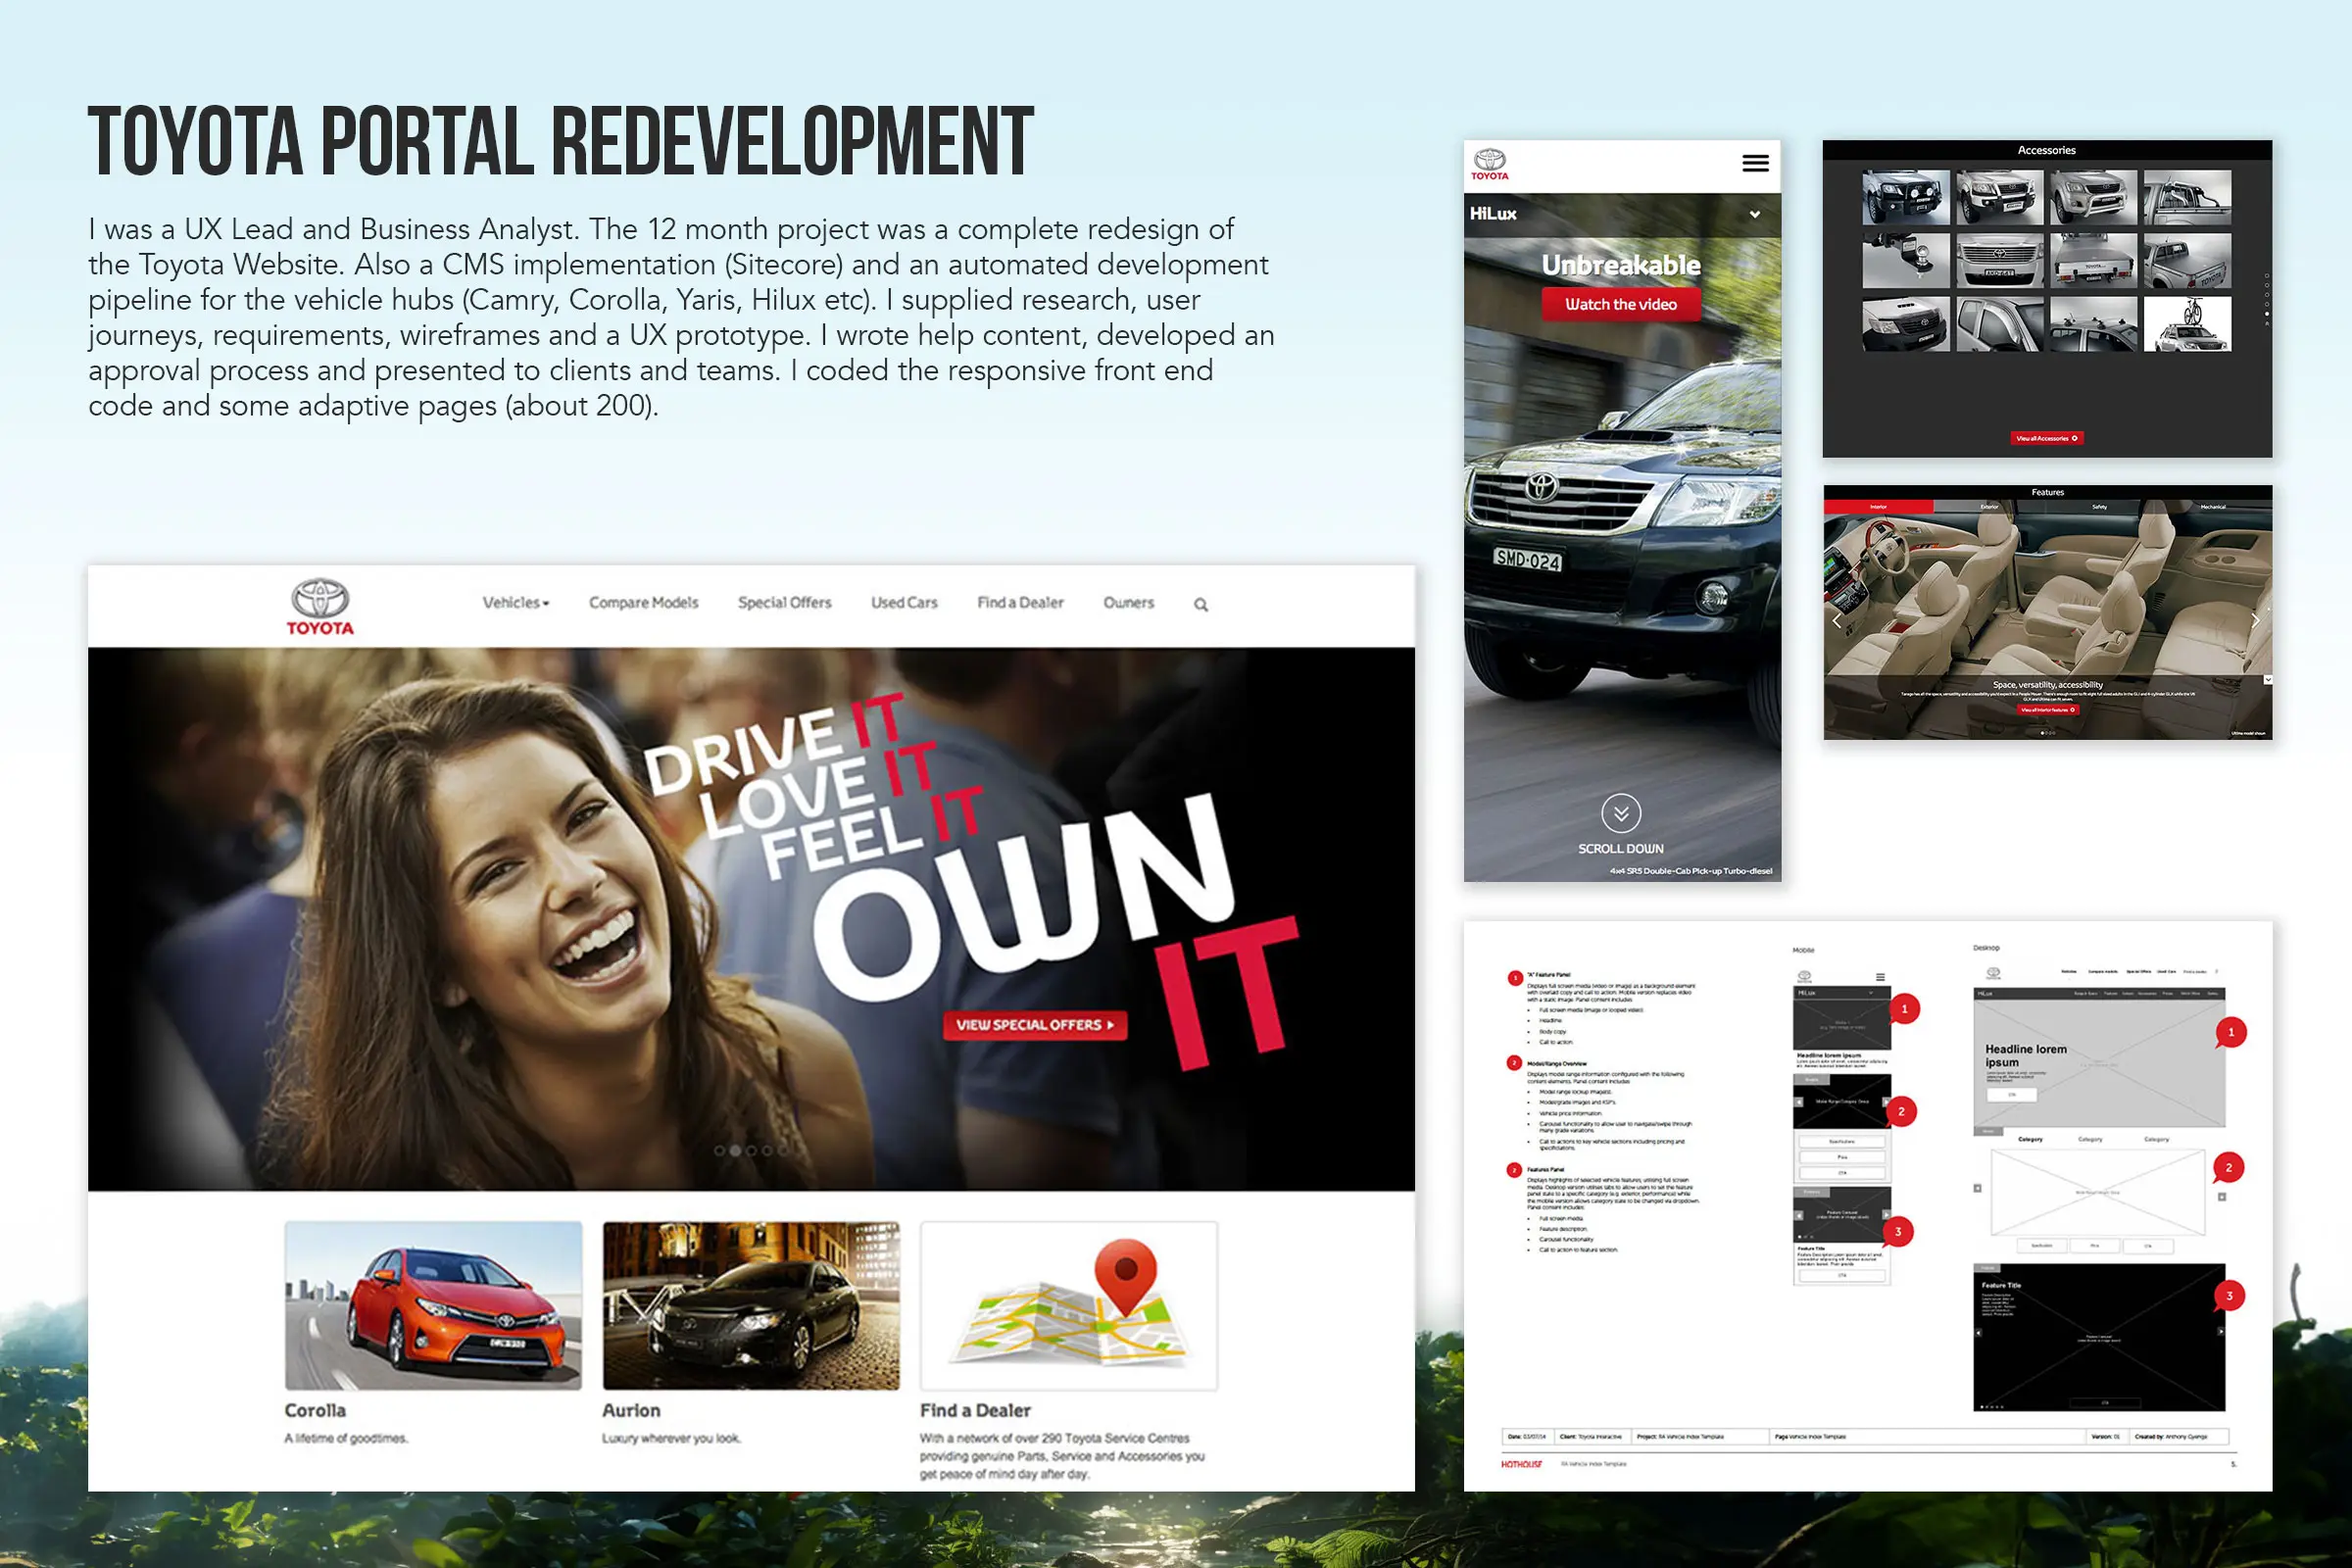 Toyota Responsive Adaptive - User Experience and Front End Code